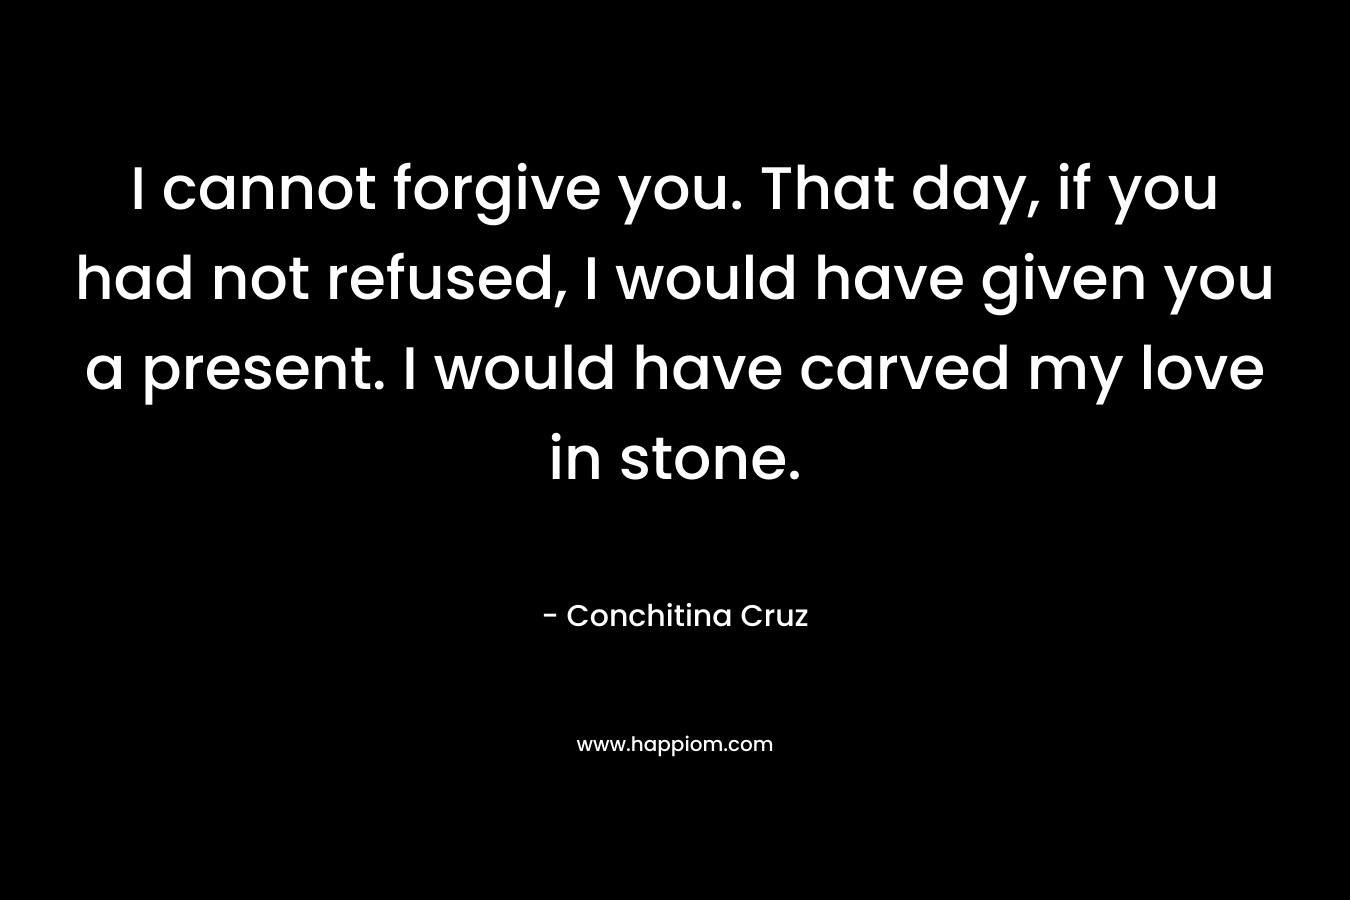 I cannot forgive you. That day, if you had not refused, I would have given you a present. I would have carved my love in stone. – Conchitina Cruz